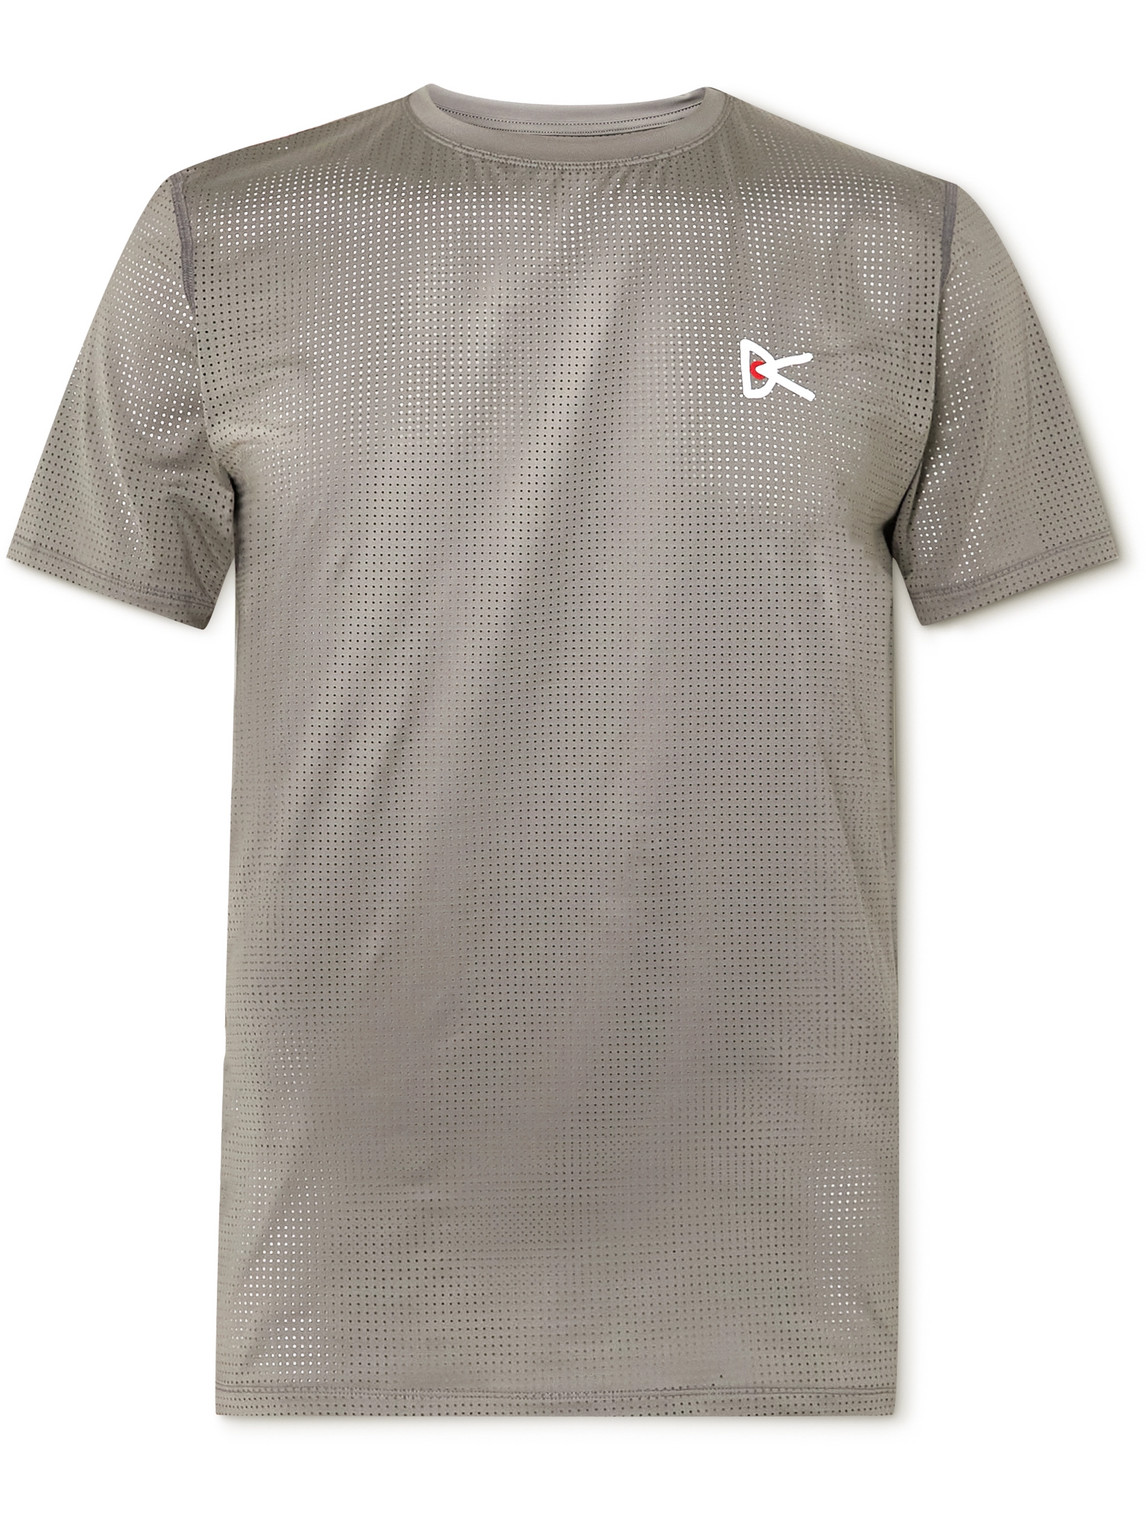 DISTRICT VISION LOGO-PRINT PERFORATED STRETCH-JERSEY T-SHIRT